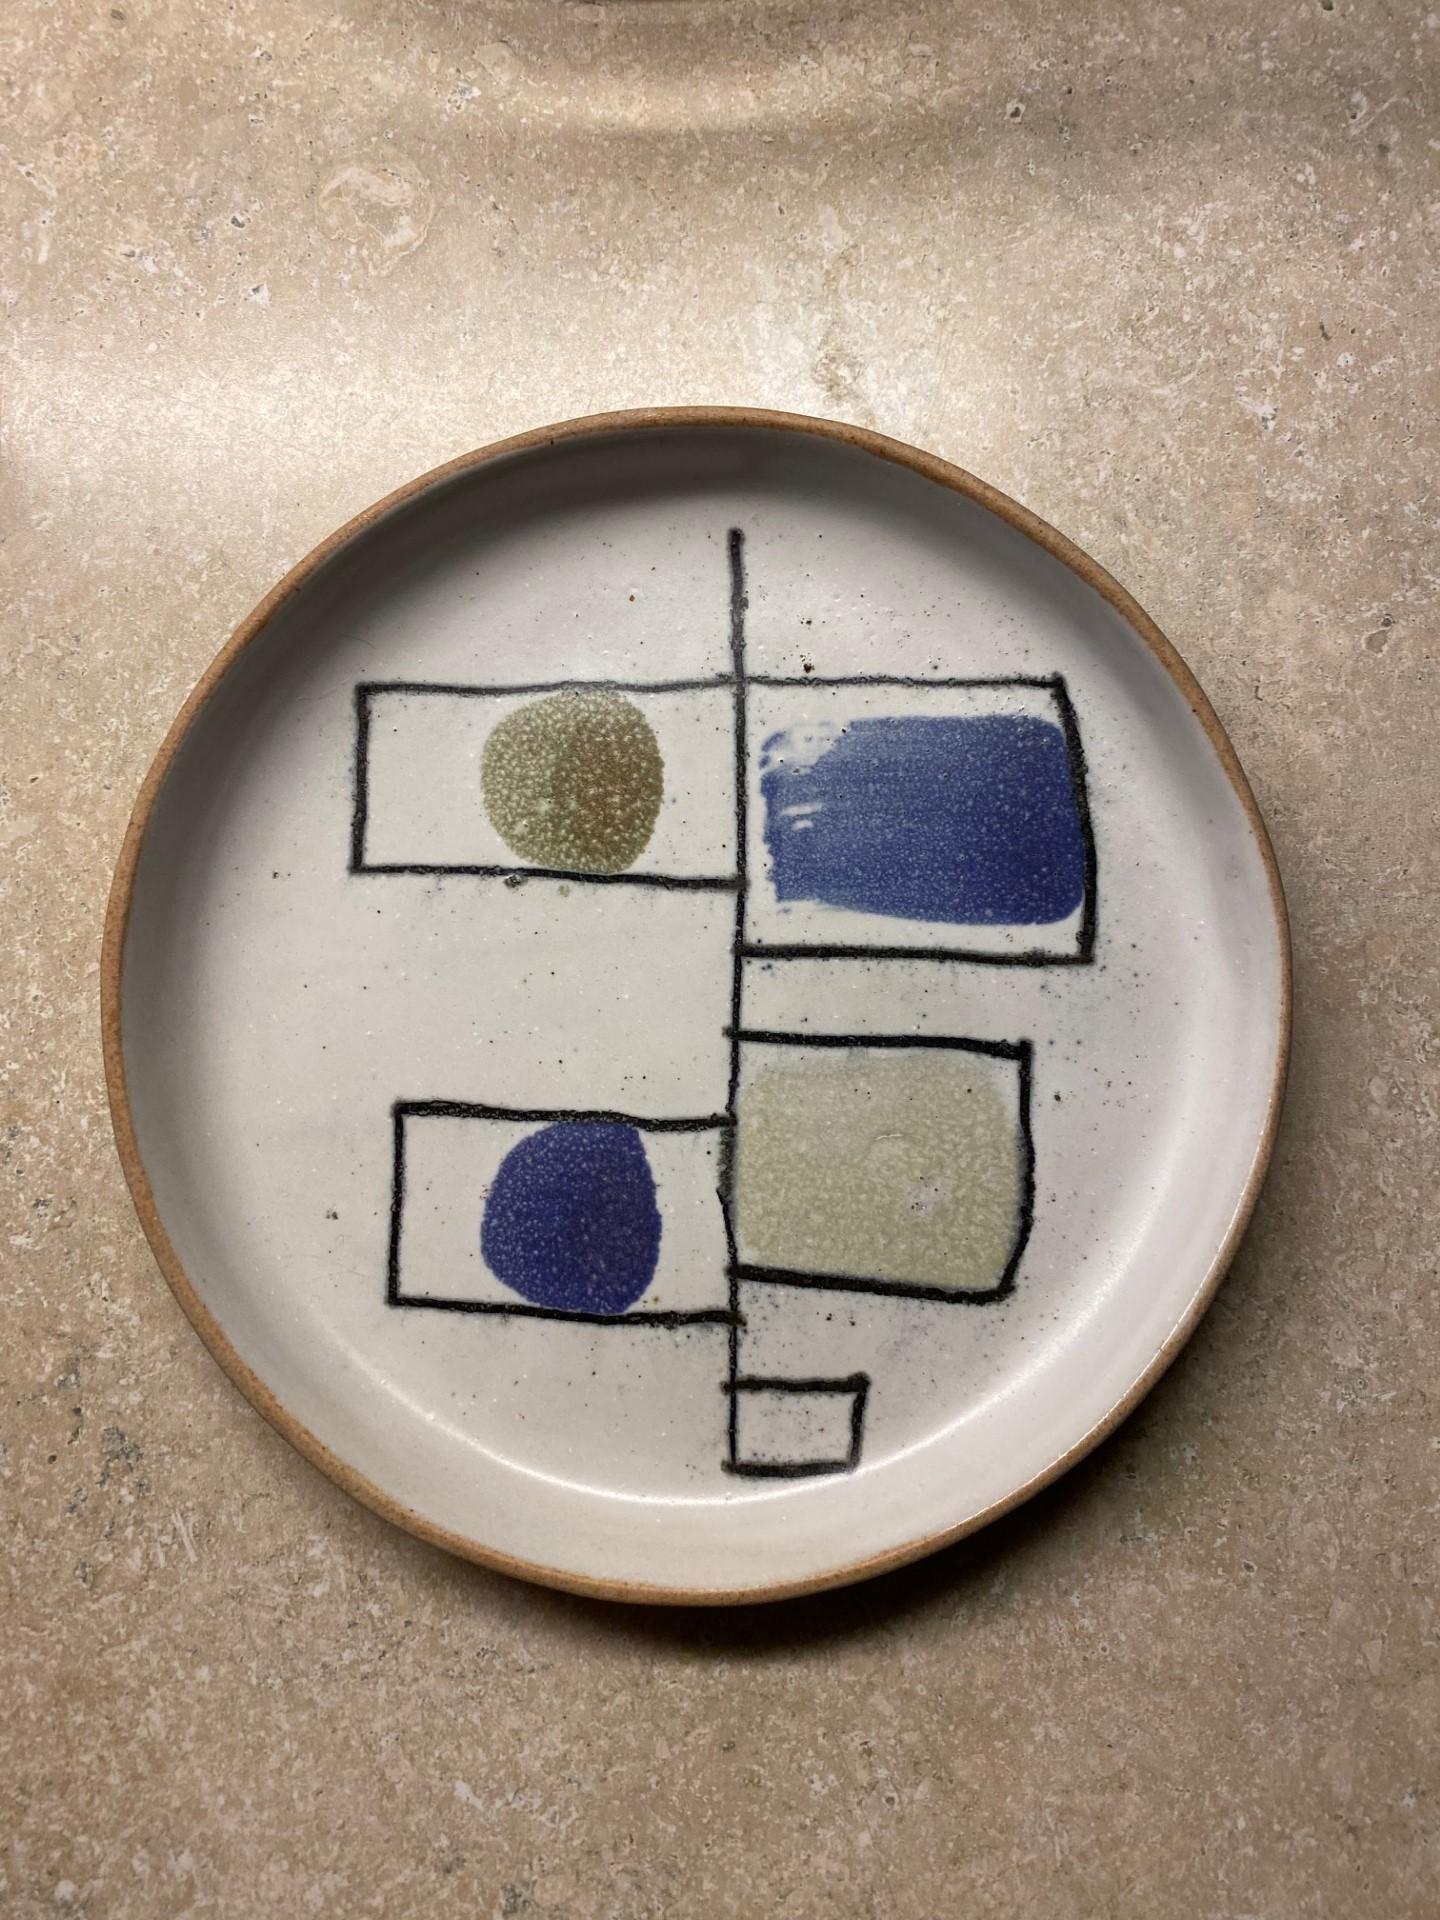 Beautiful and unique ceramic piece that is evocative of the abstract themes of the 1960s.  This rare piece by David Gil (1922-2002) is both minimalist and current.  The abstract design emerges as current and special.  This piece is in great